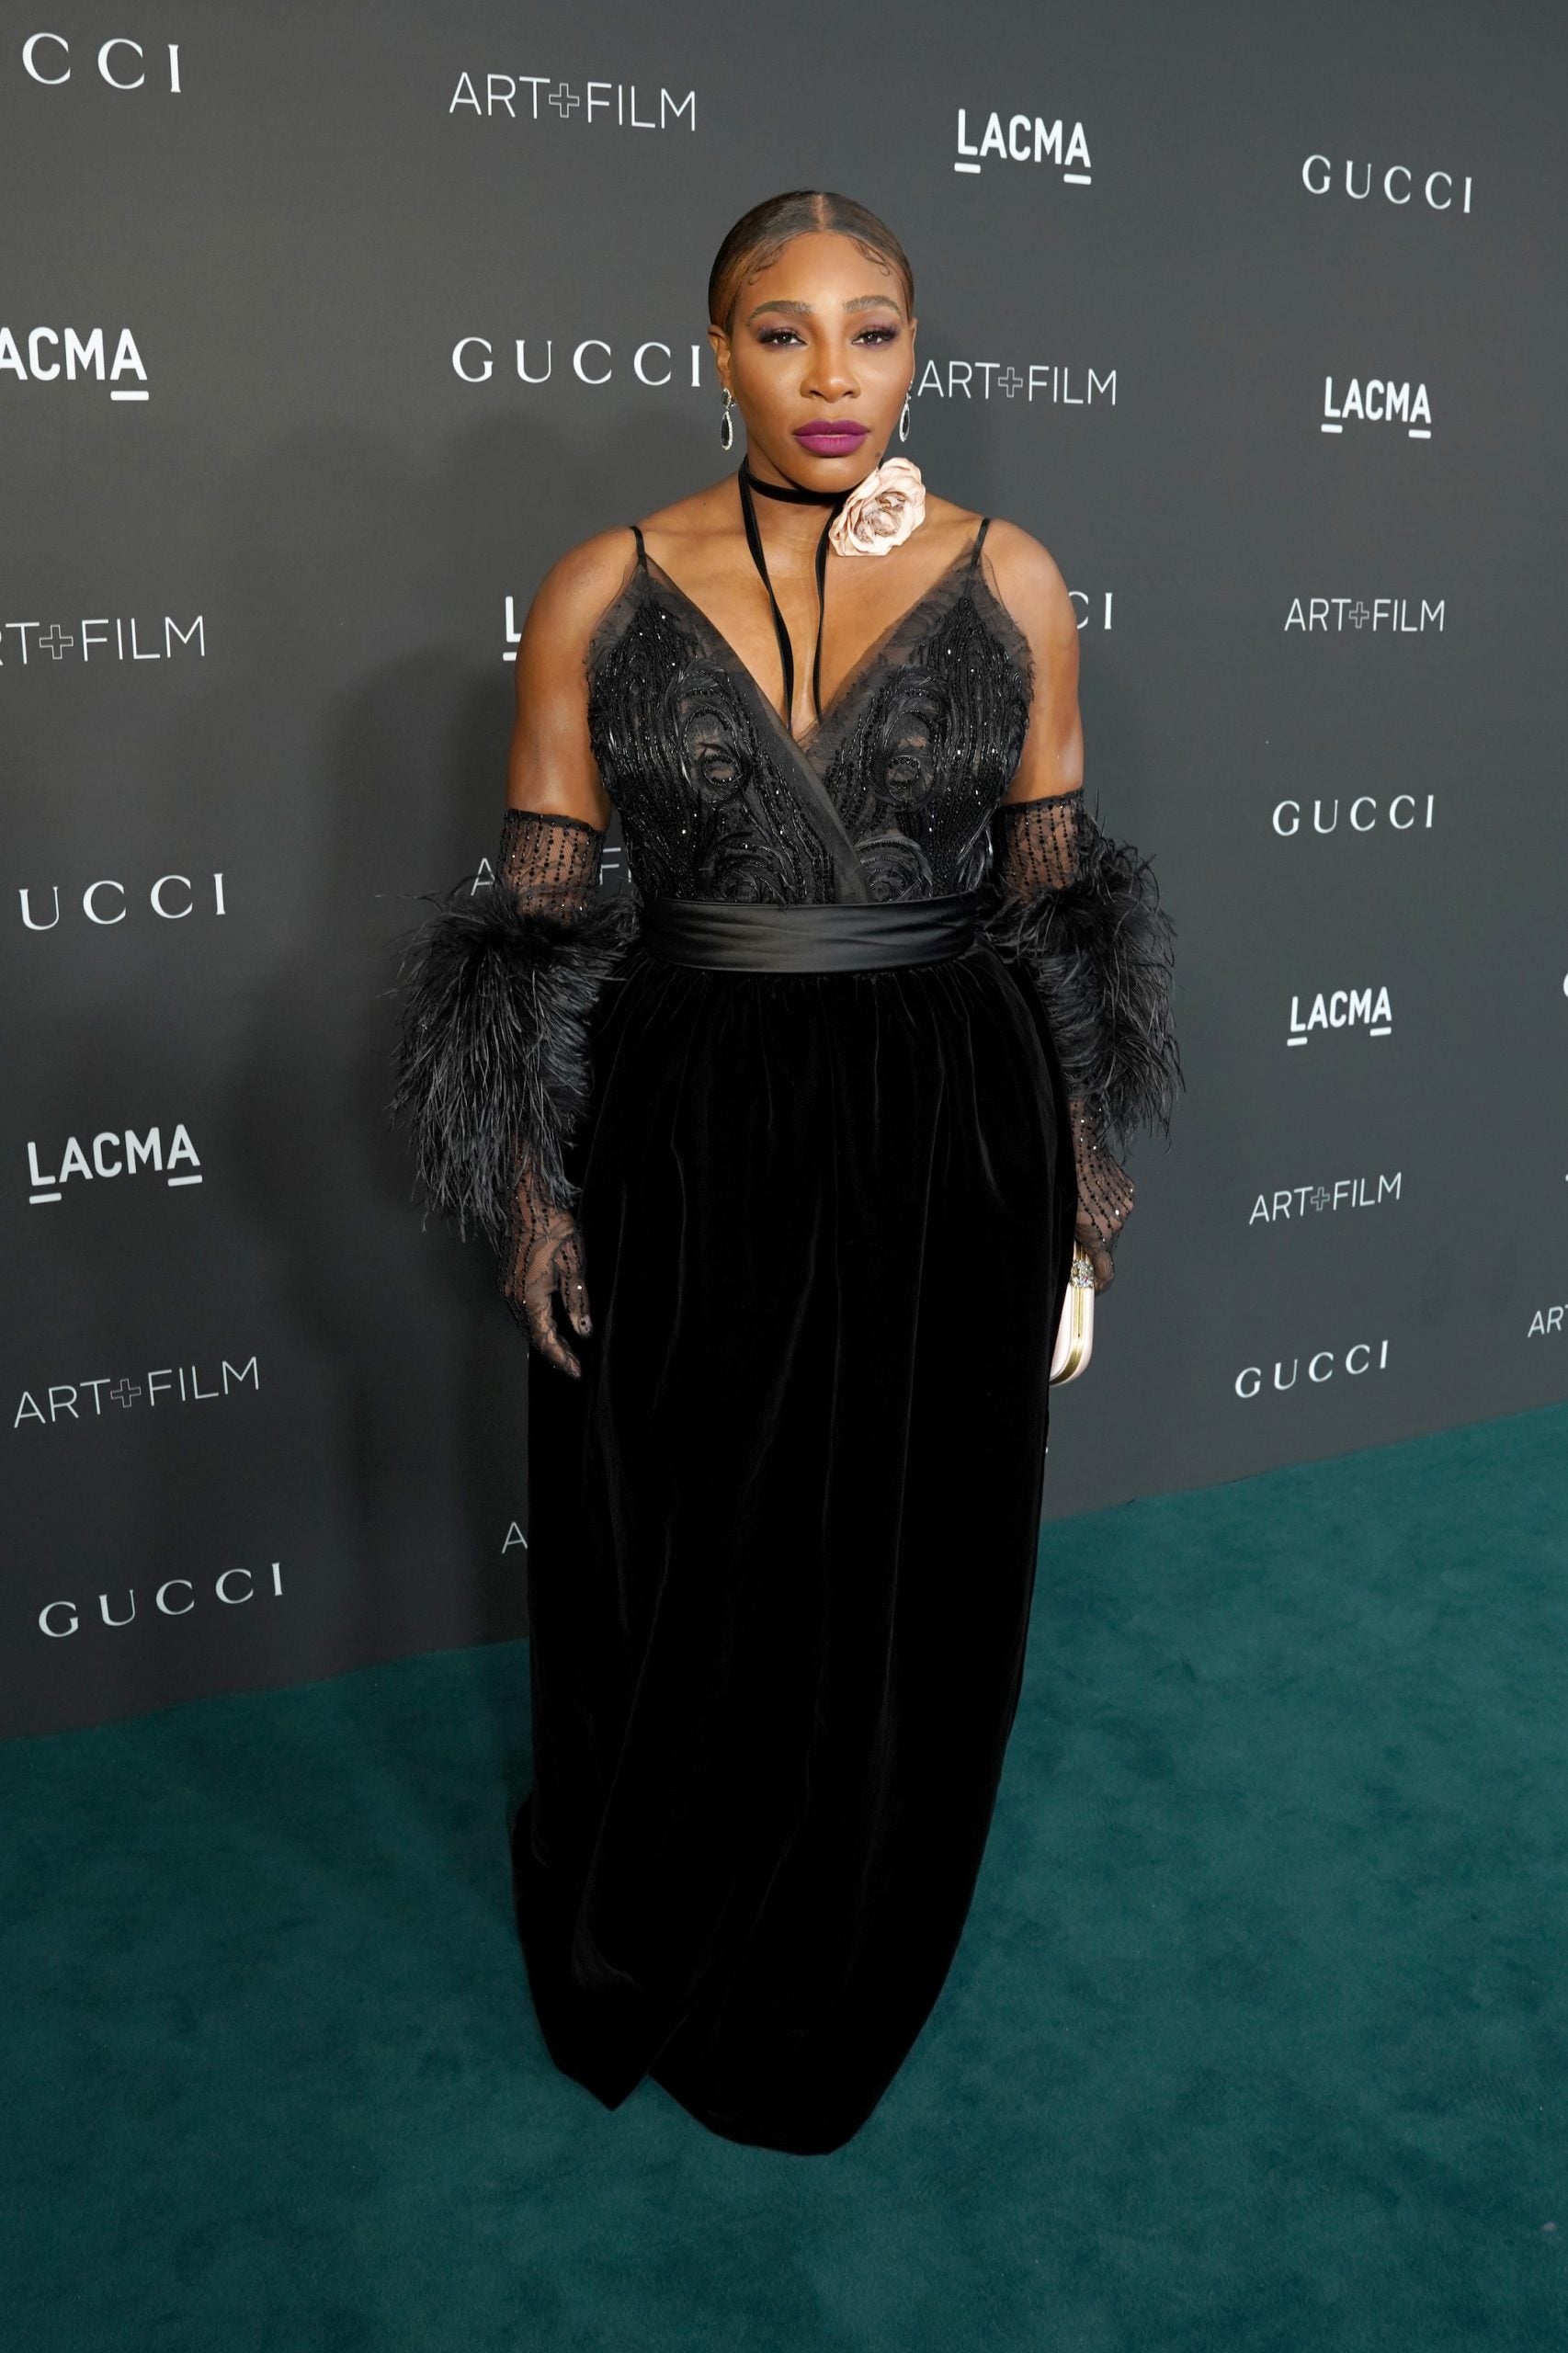 Red Carpet Royalty At LACMA’s 10th Annual Art And Film Gala